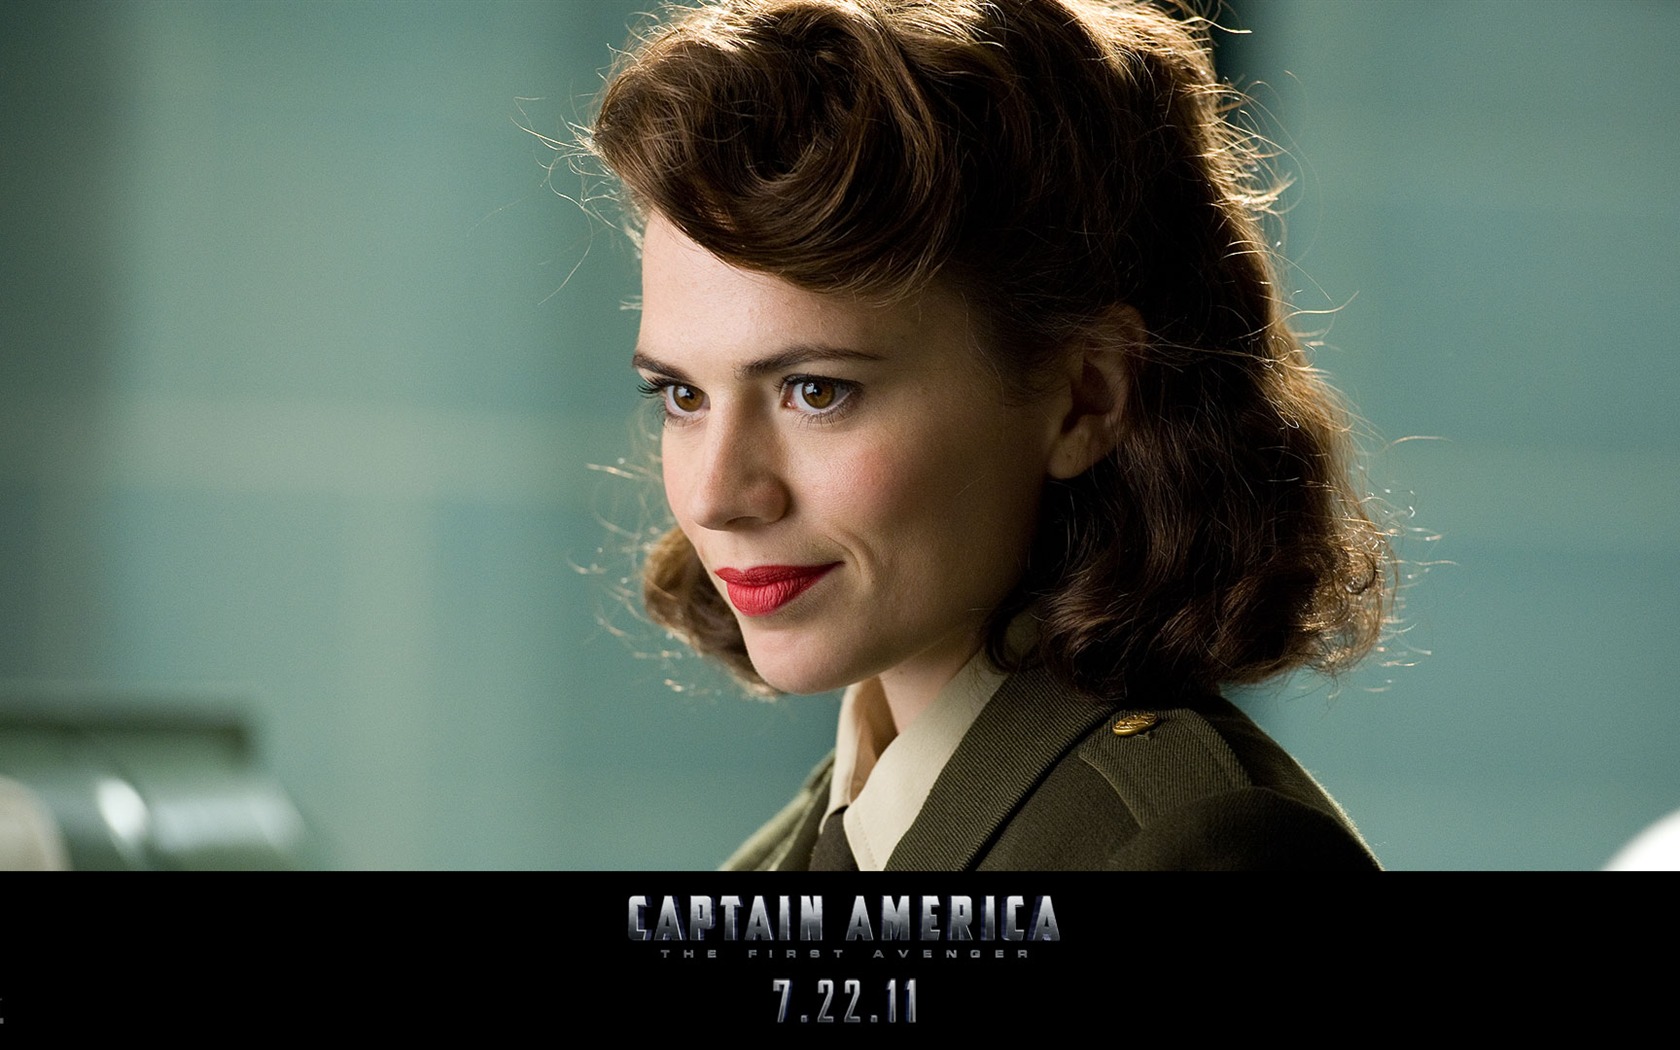 Captain America: The First Avenger wallpapers HD #11 - 1680x1050